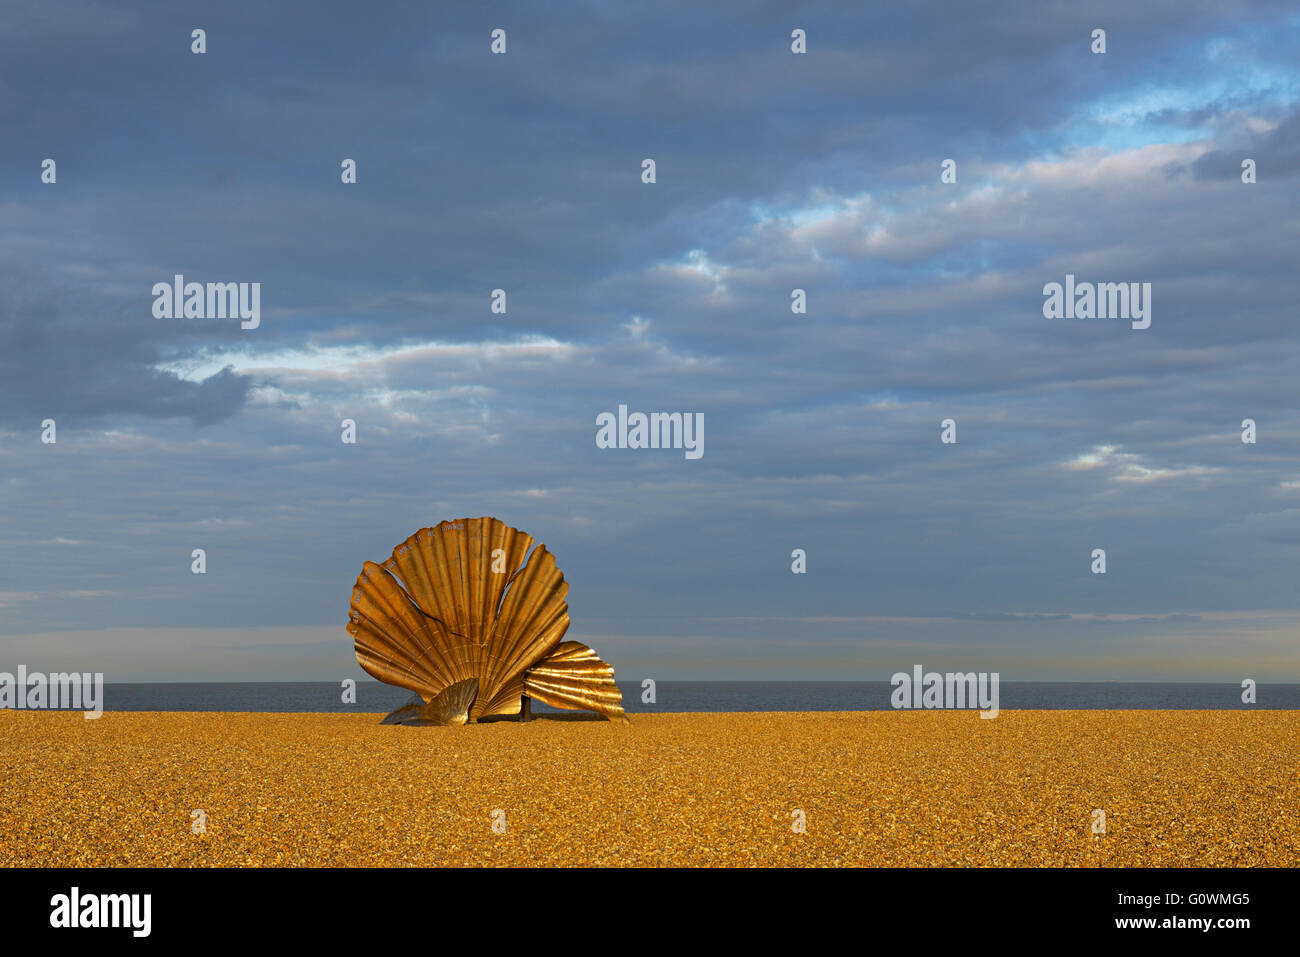 Sculpture, The Scallop, on the beach at Aldeburgh, Suffolk, England UK Stock Photo